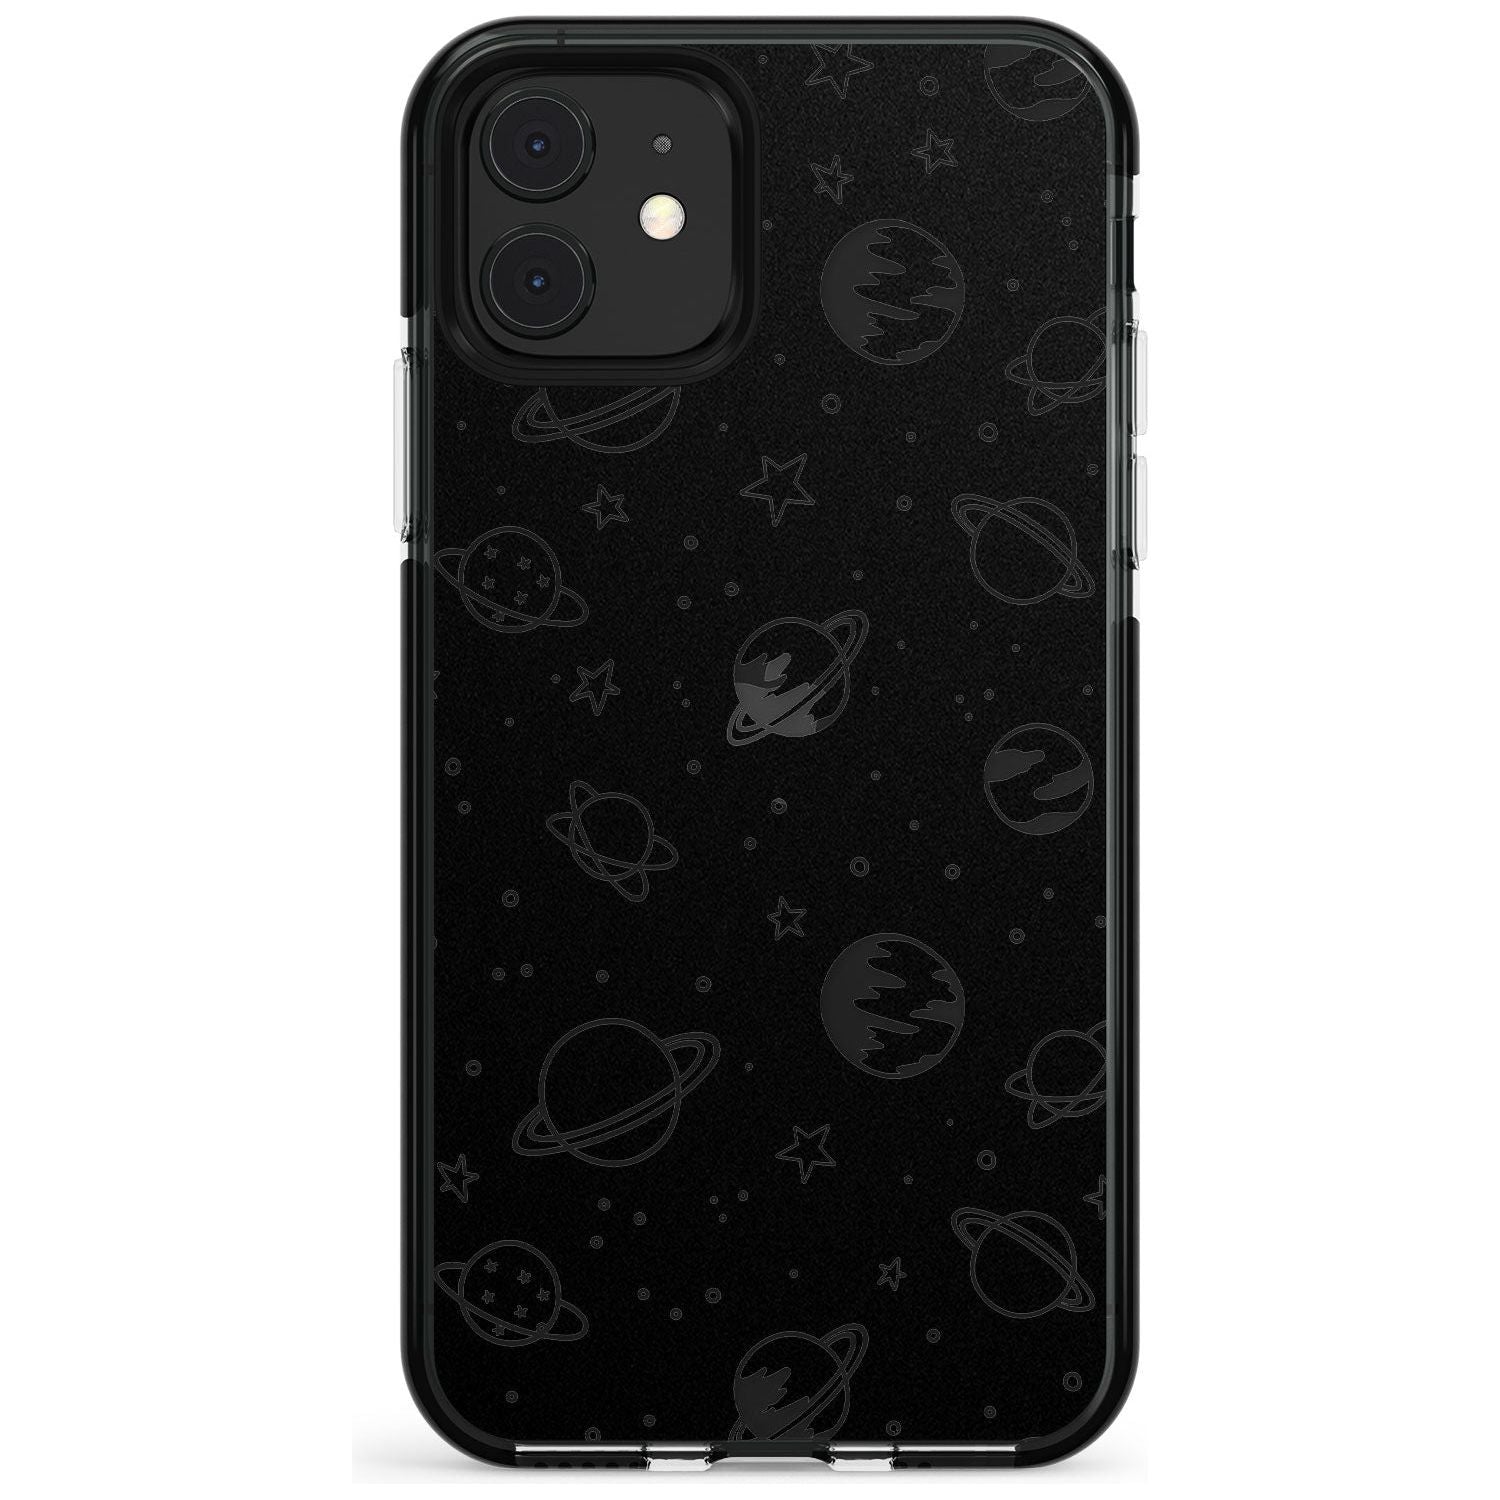 Outer Space Outlines: Clear on Black Pink Fade Impact Phone Case for iPhone 11 Pro Max